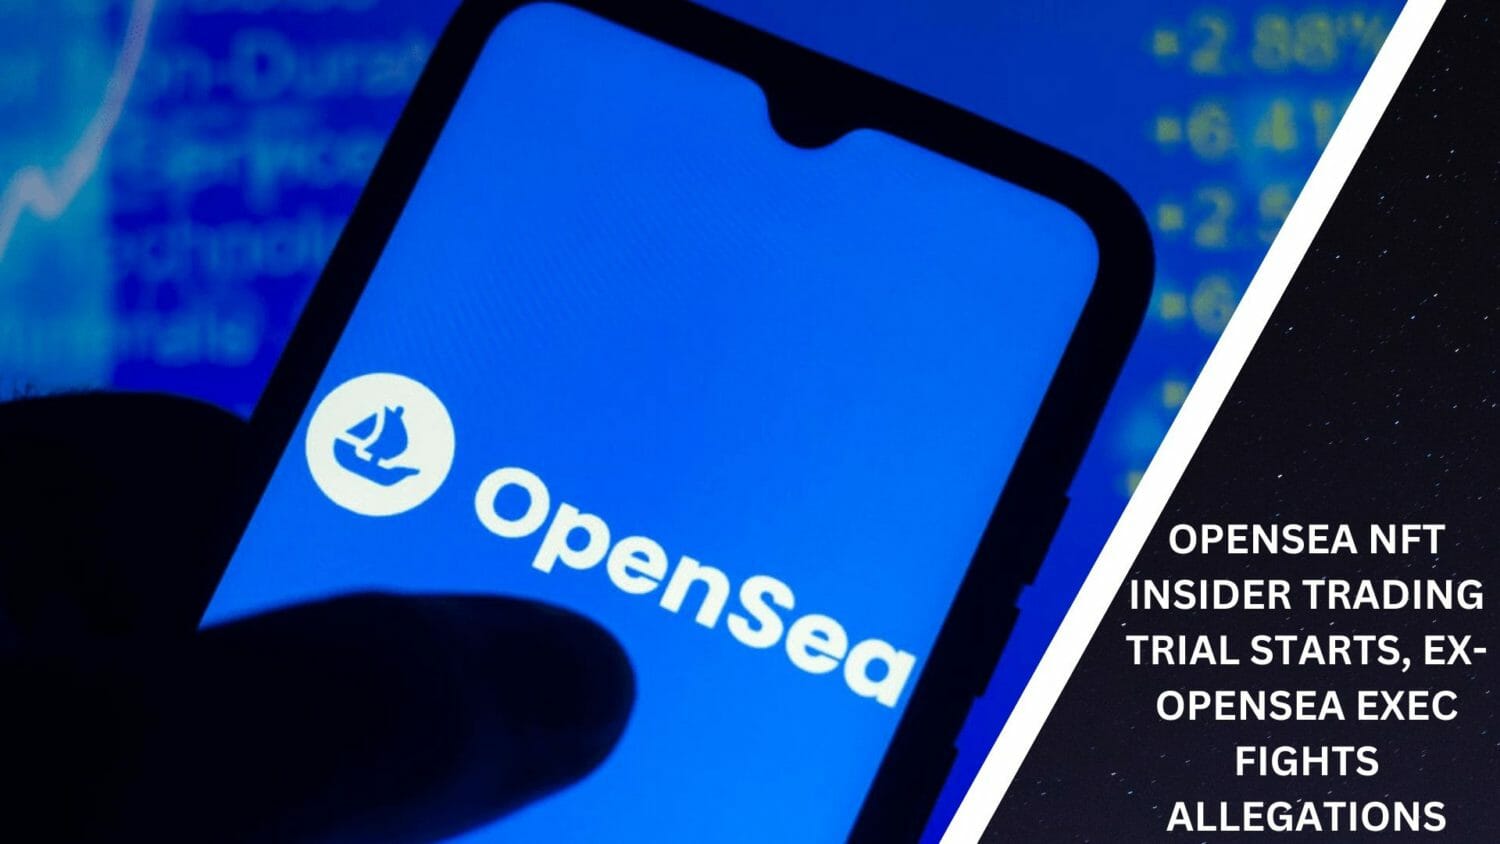 Opensea Nft Insider Trading Trial Starts, Ex-Opensea Exec Fights Allegations